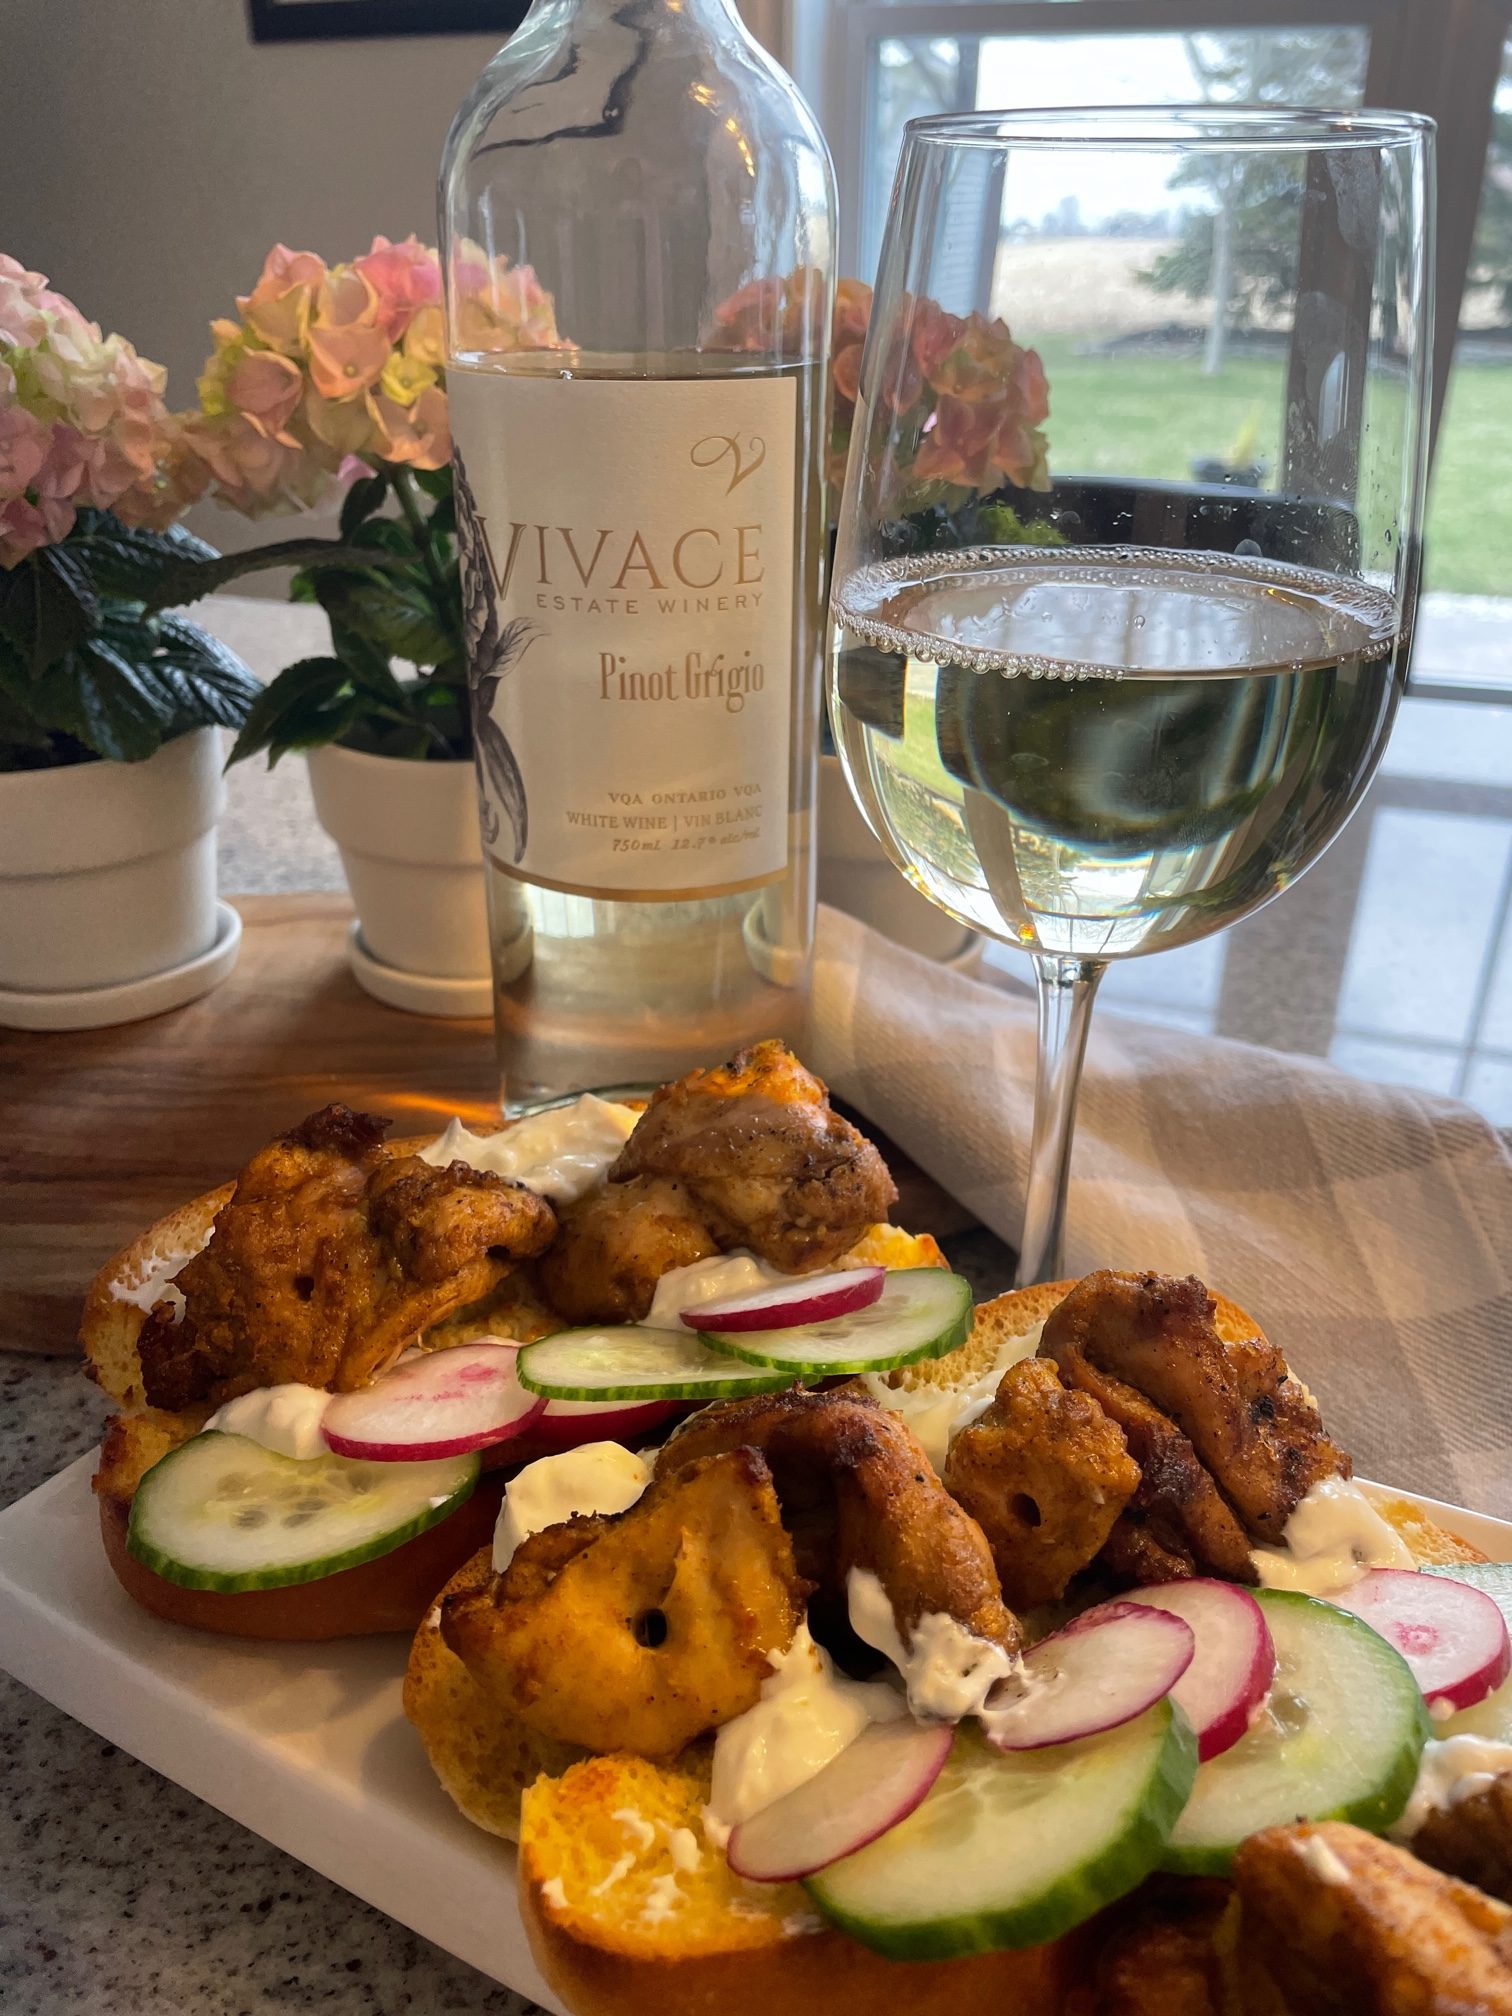 Featured image for “Vivace Estate Winery Pinot Grigio with Shawarma on a Bun with Yogurt-Tahini Sauce.”